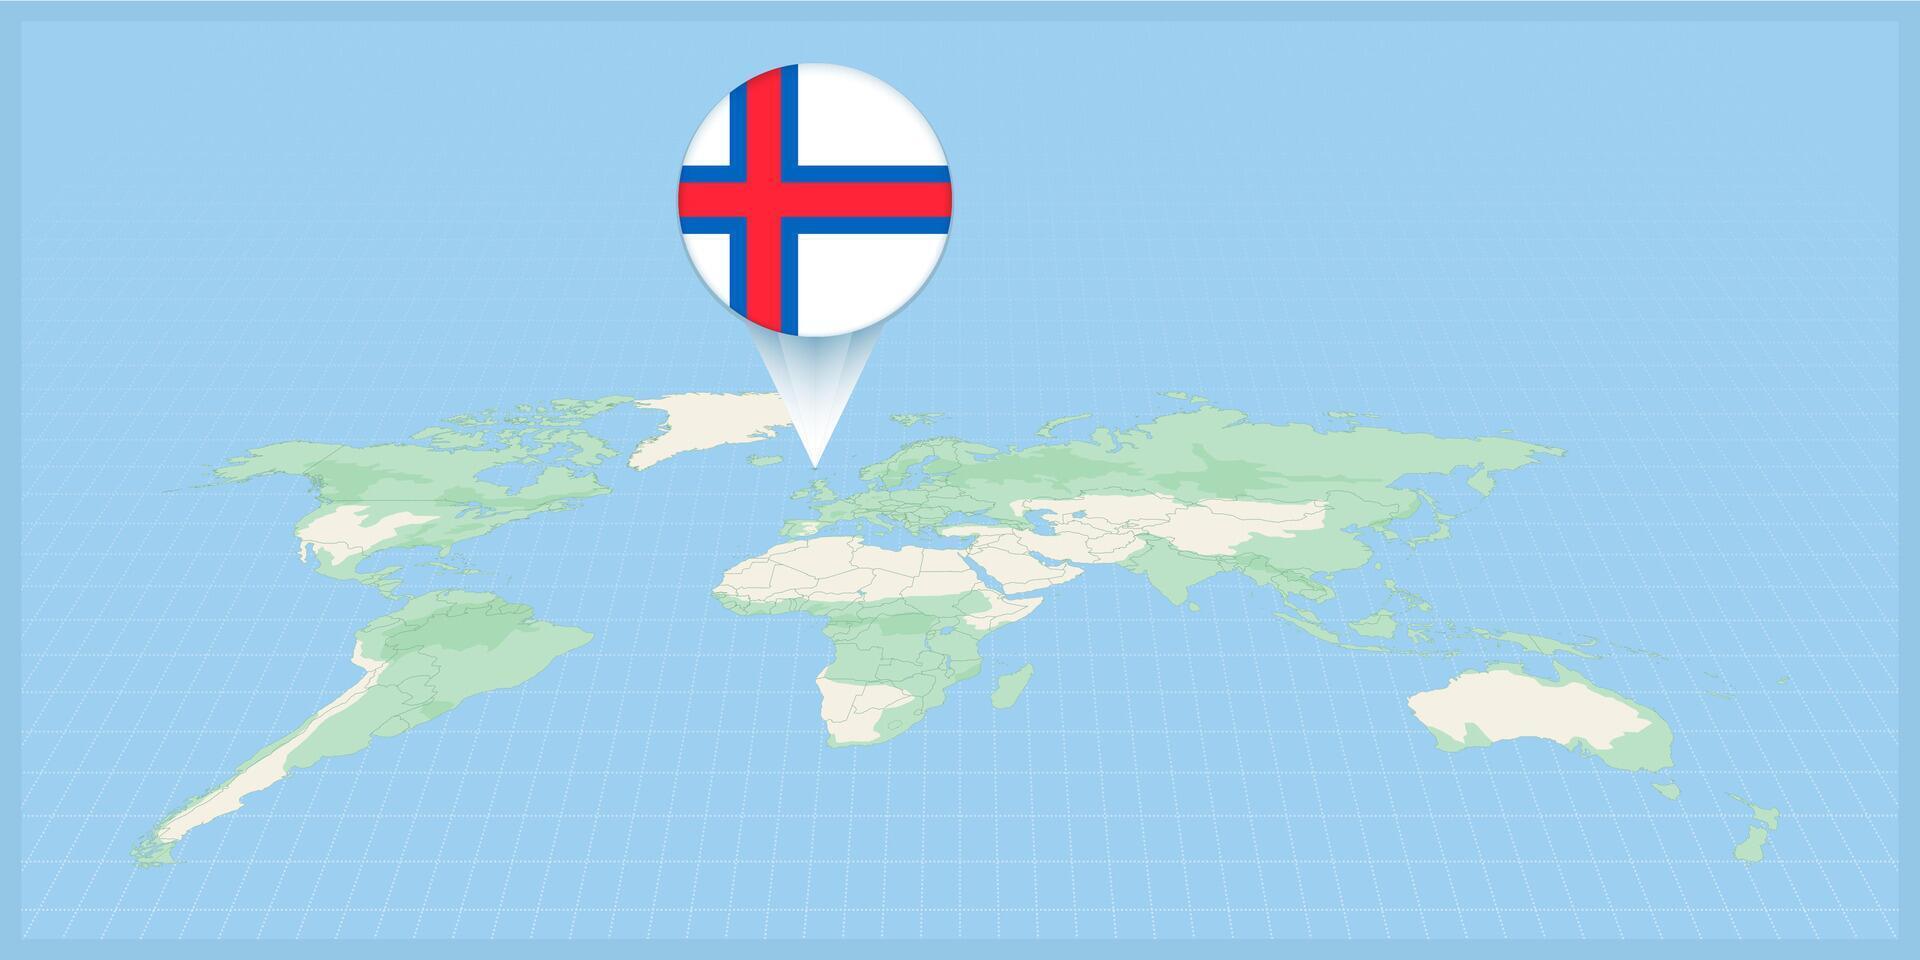 Location of Faroe Islands on the world map, marked with Faroe Islands flag pin. vector